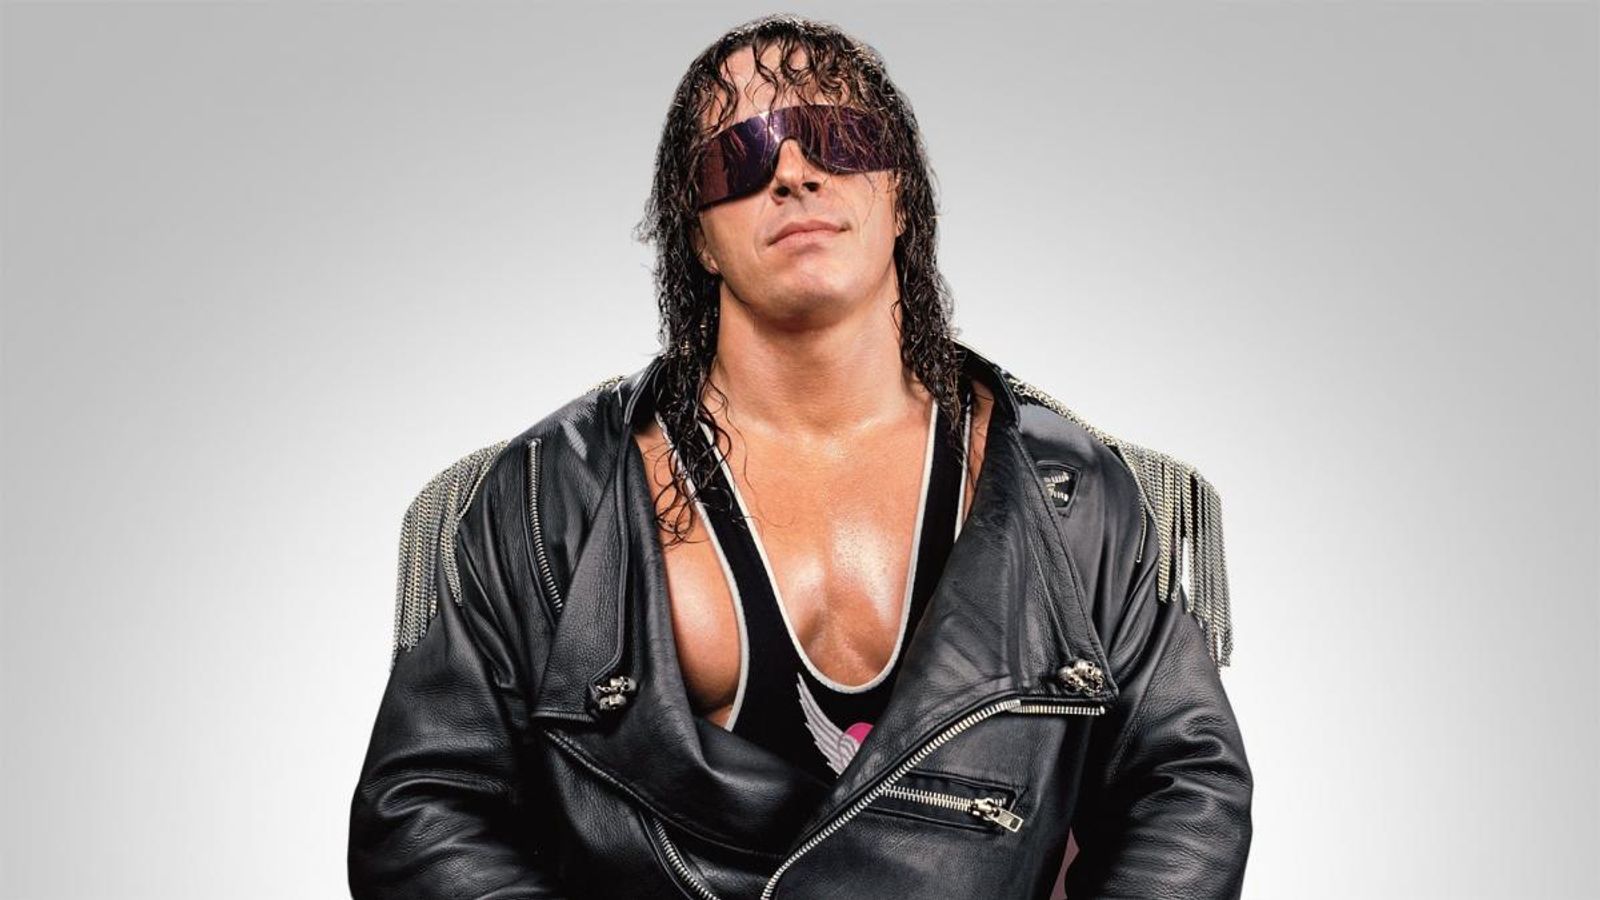 Bret 'the Hitman' Hart: Who is he today and what is his legacy? | WWE News  | Sky Sports